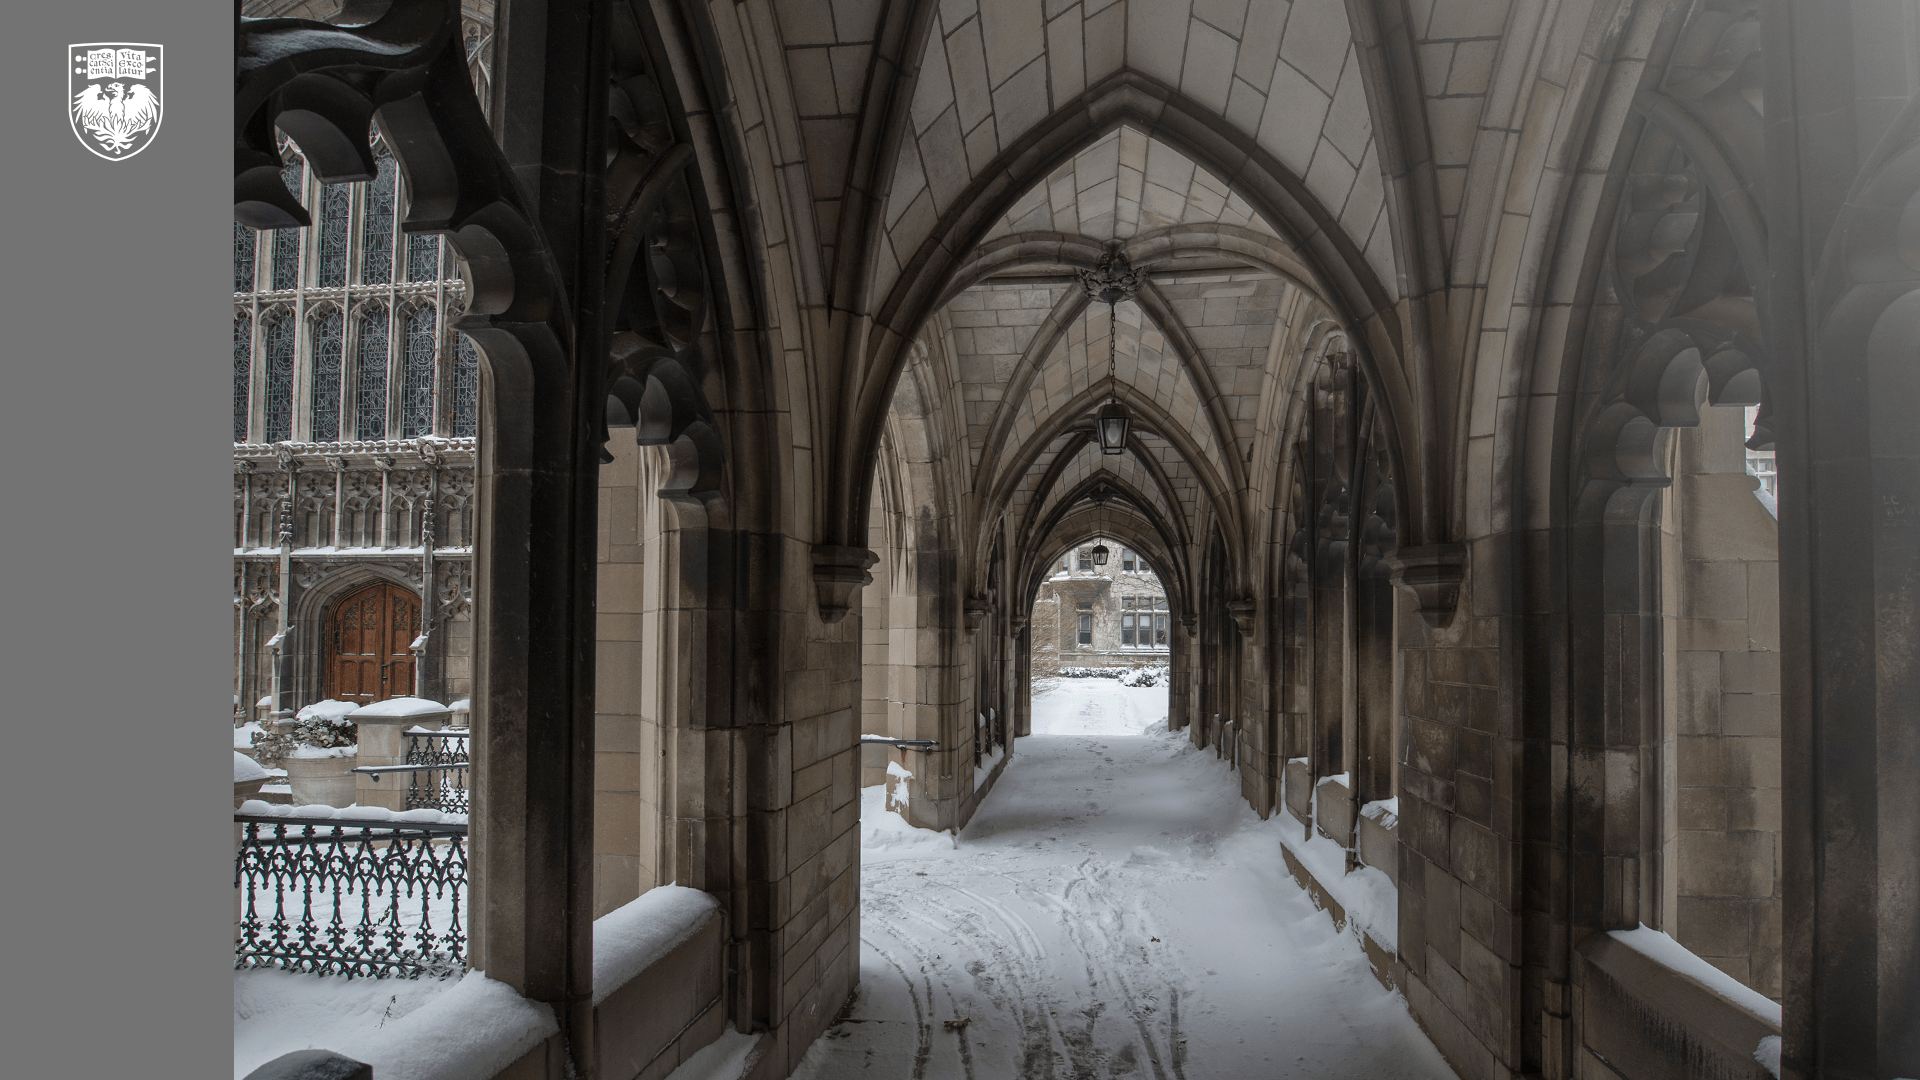 Snow in walkway with gothic arches and stone overhead